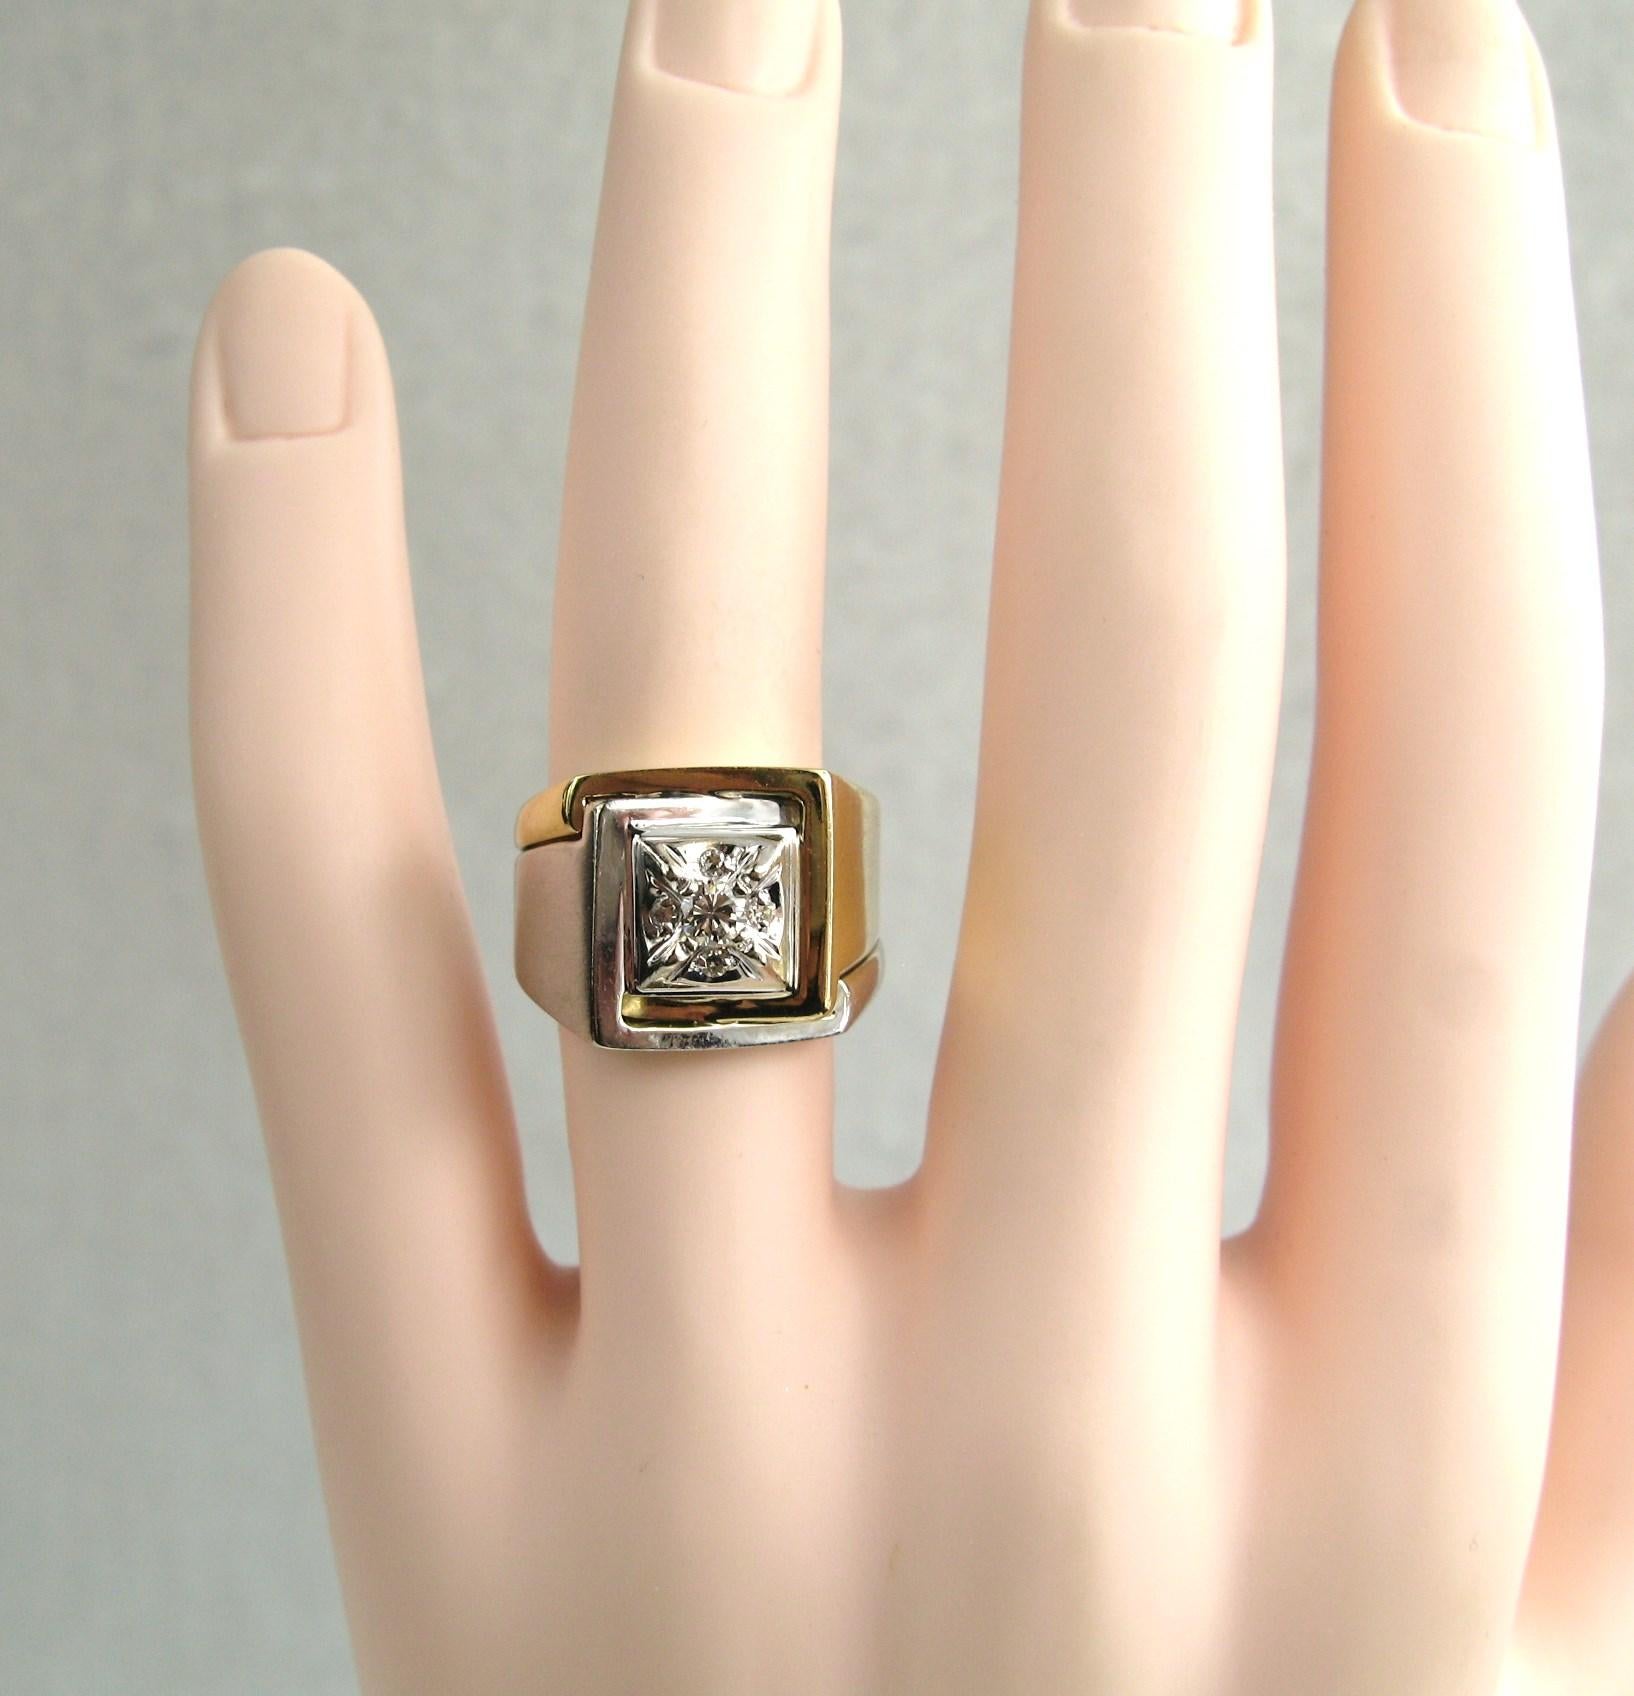 Stunning Mid-Century 14K White & Yellow Gold Diamond Ring. 4 Accent diamonds with a center diamond measuring approximately .25 carats total. SI1, H/I color. The Ring is a size 6.5 and can be sized by us or your jeweler. It can be worn by both women